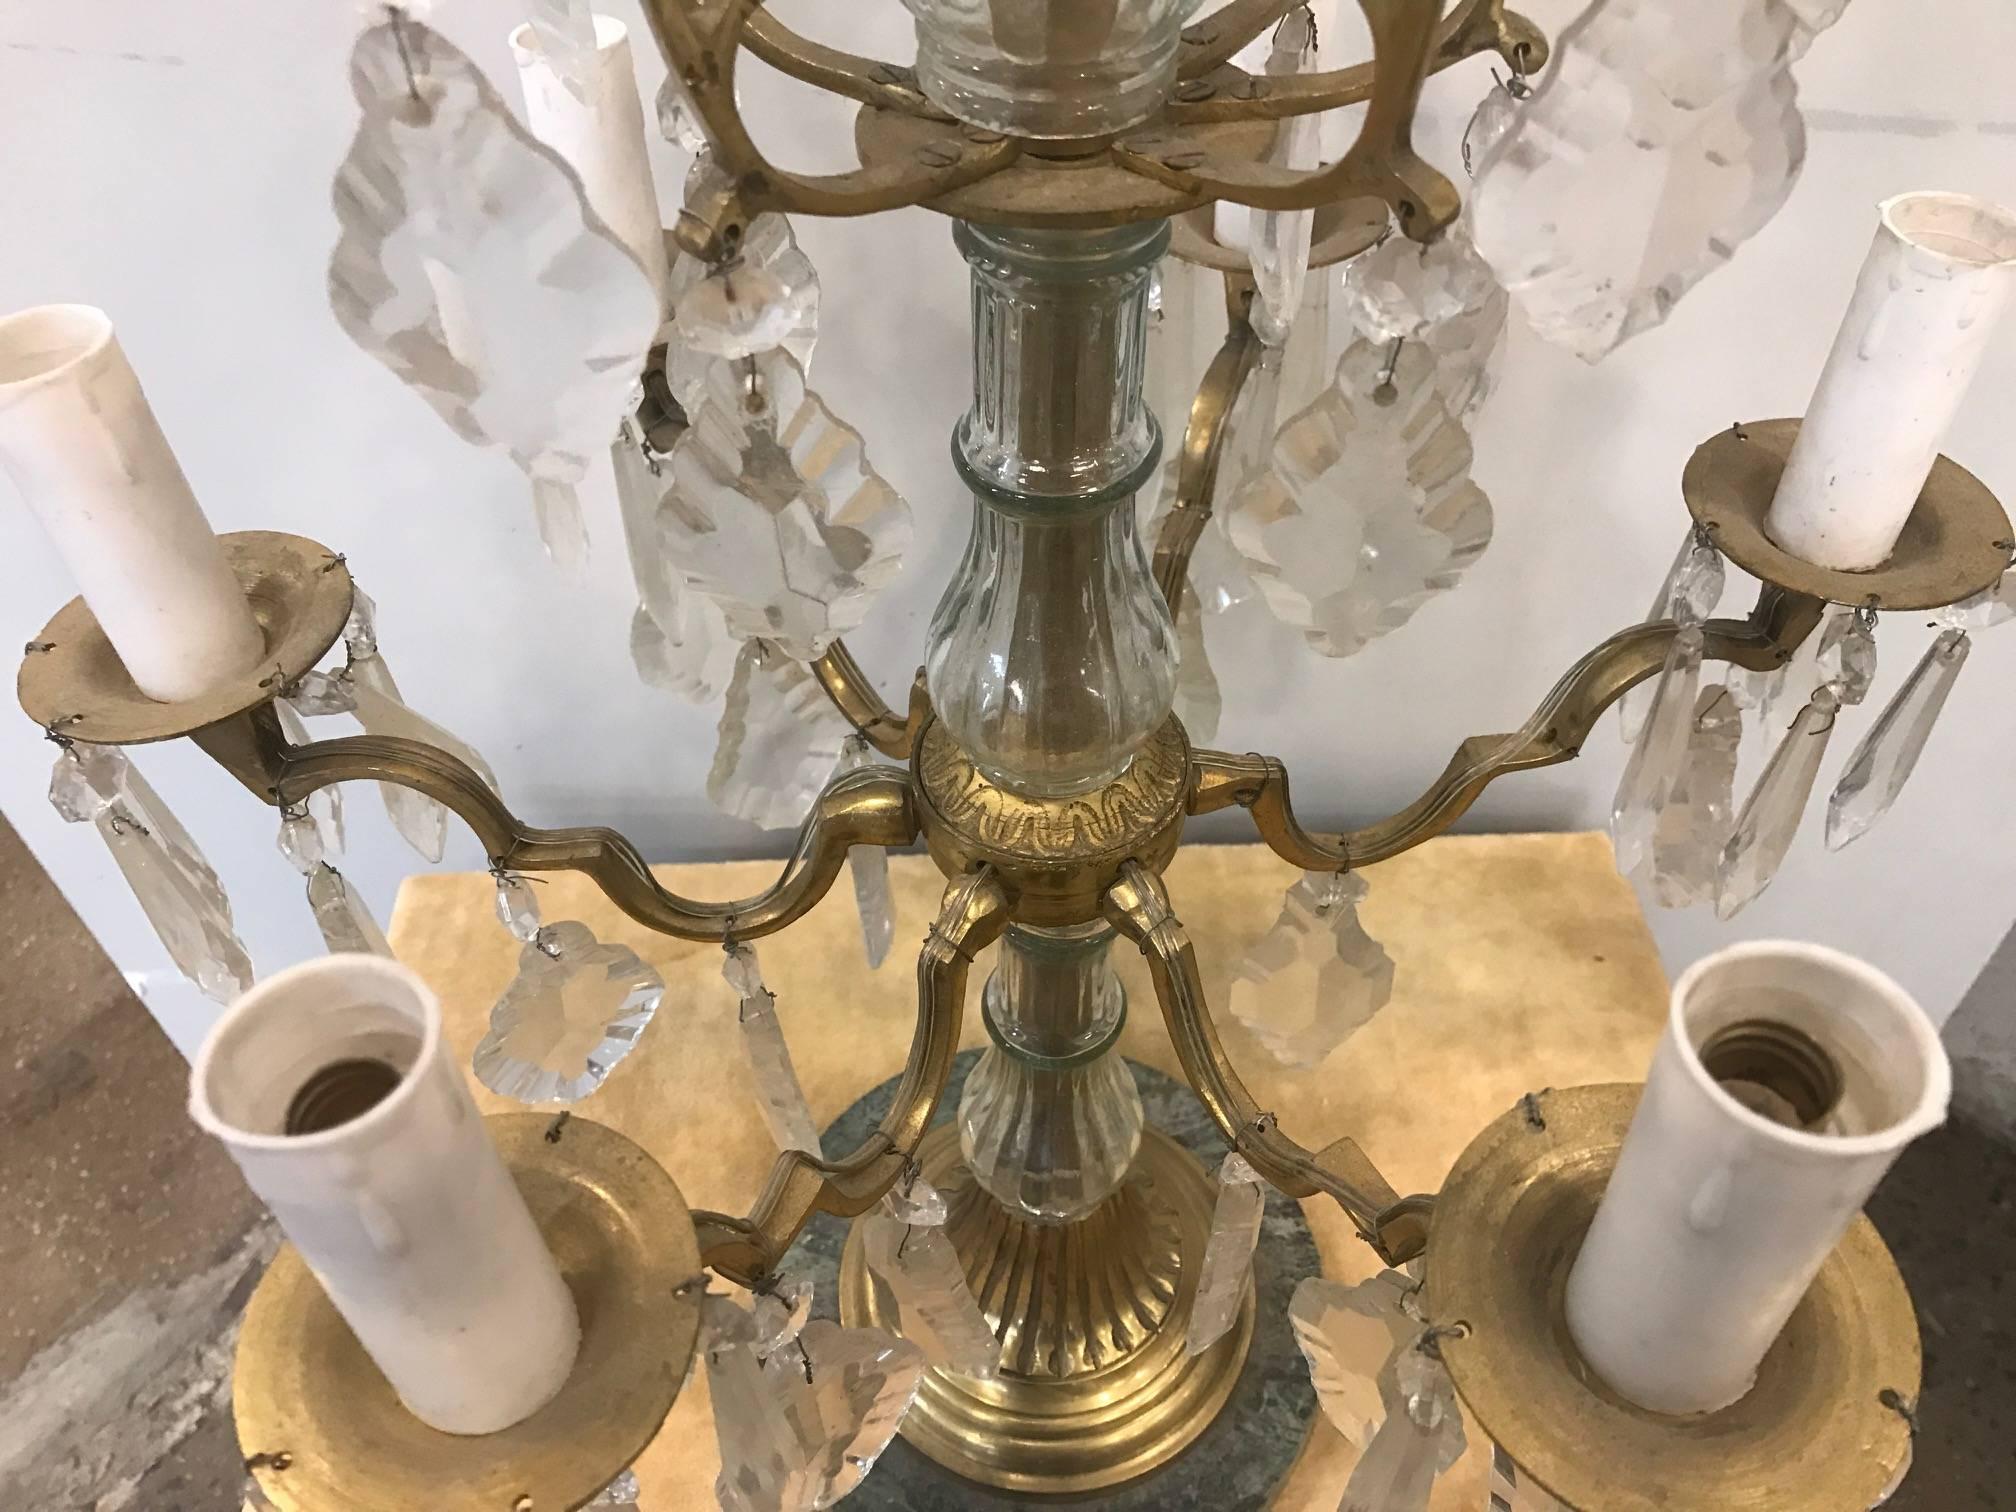 Pair of Louis XVI style six-light candelabras, crystal prisms with a marble bases.